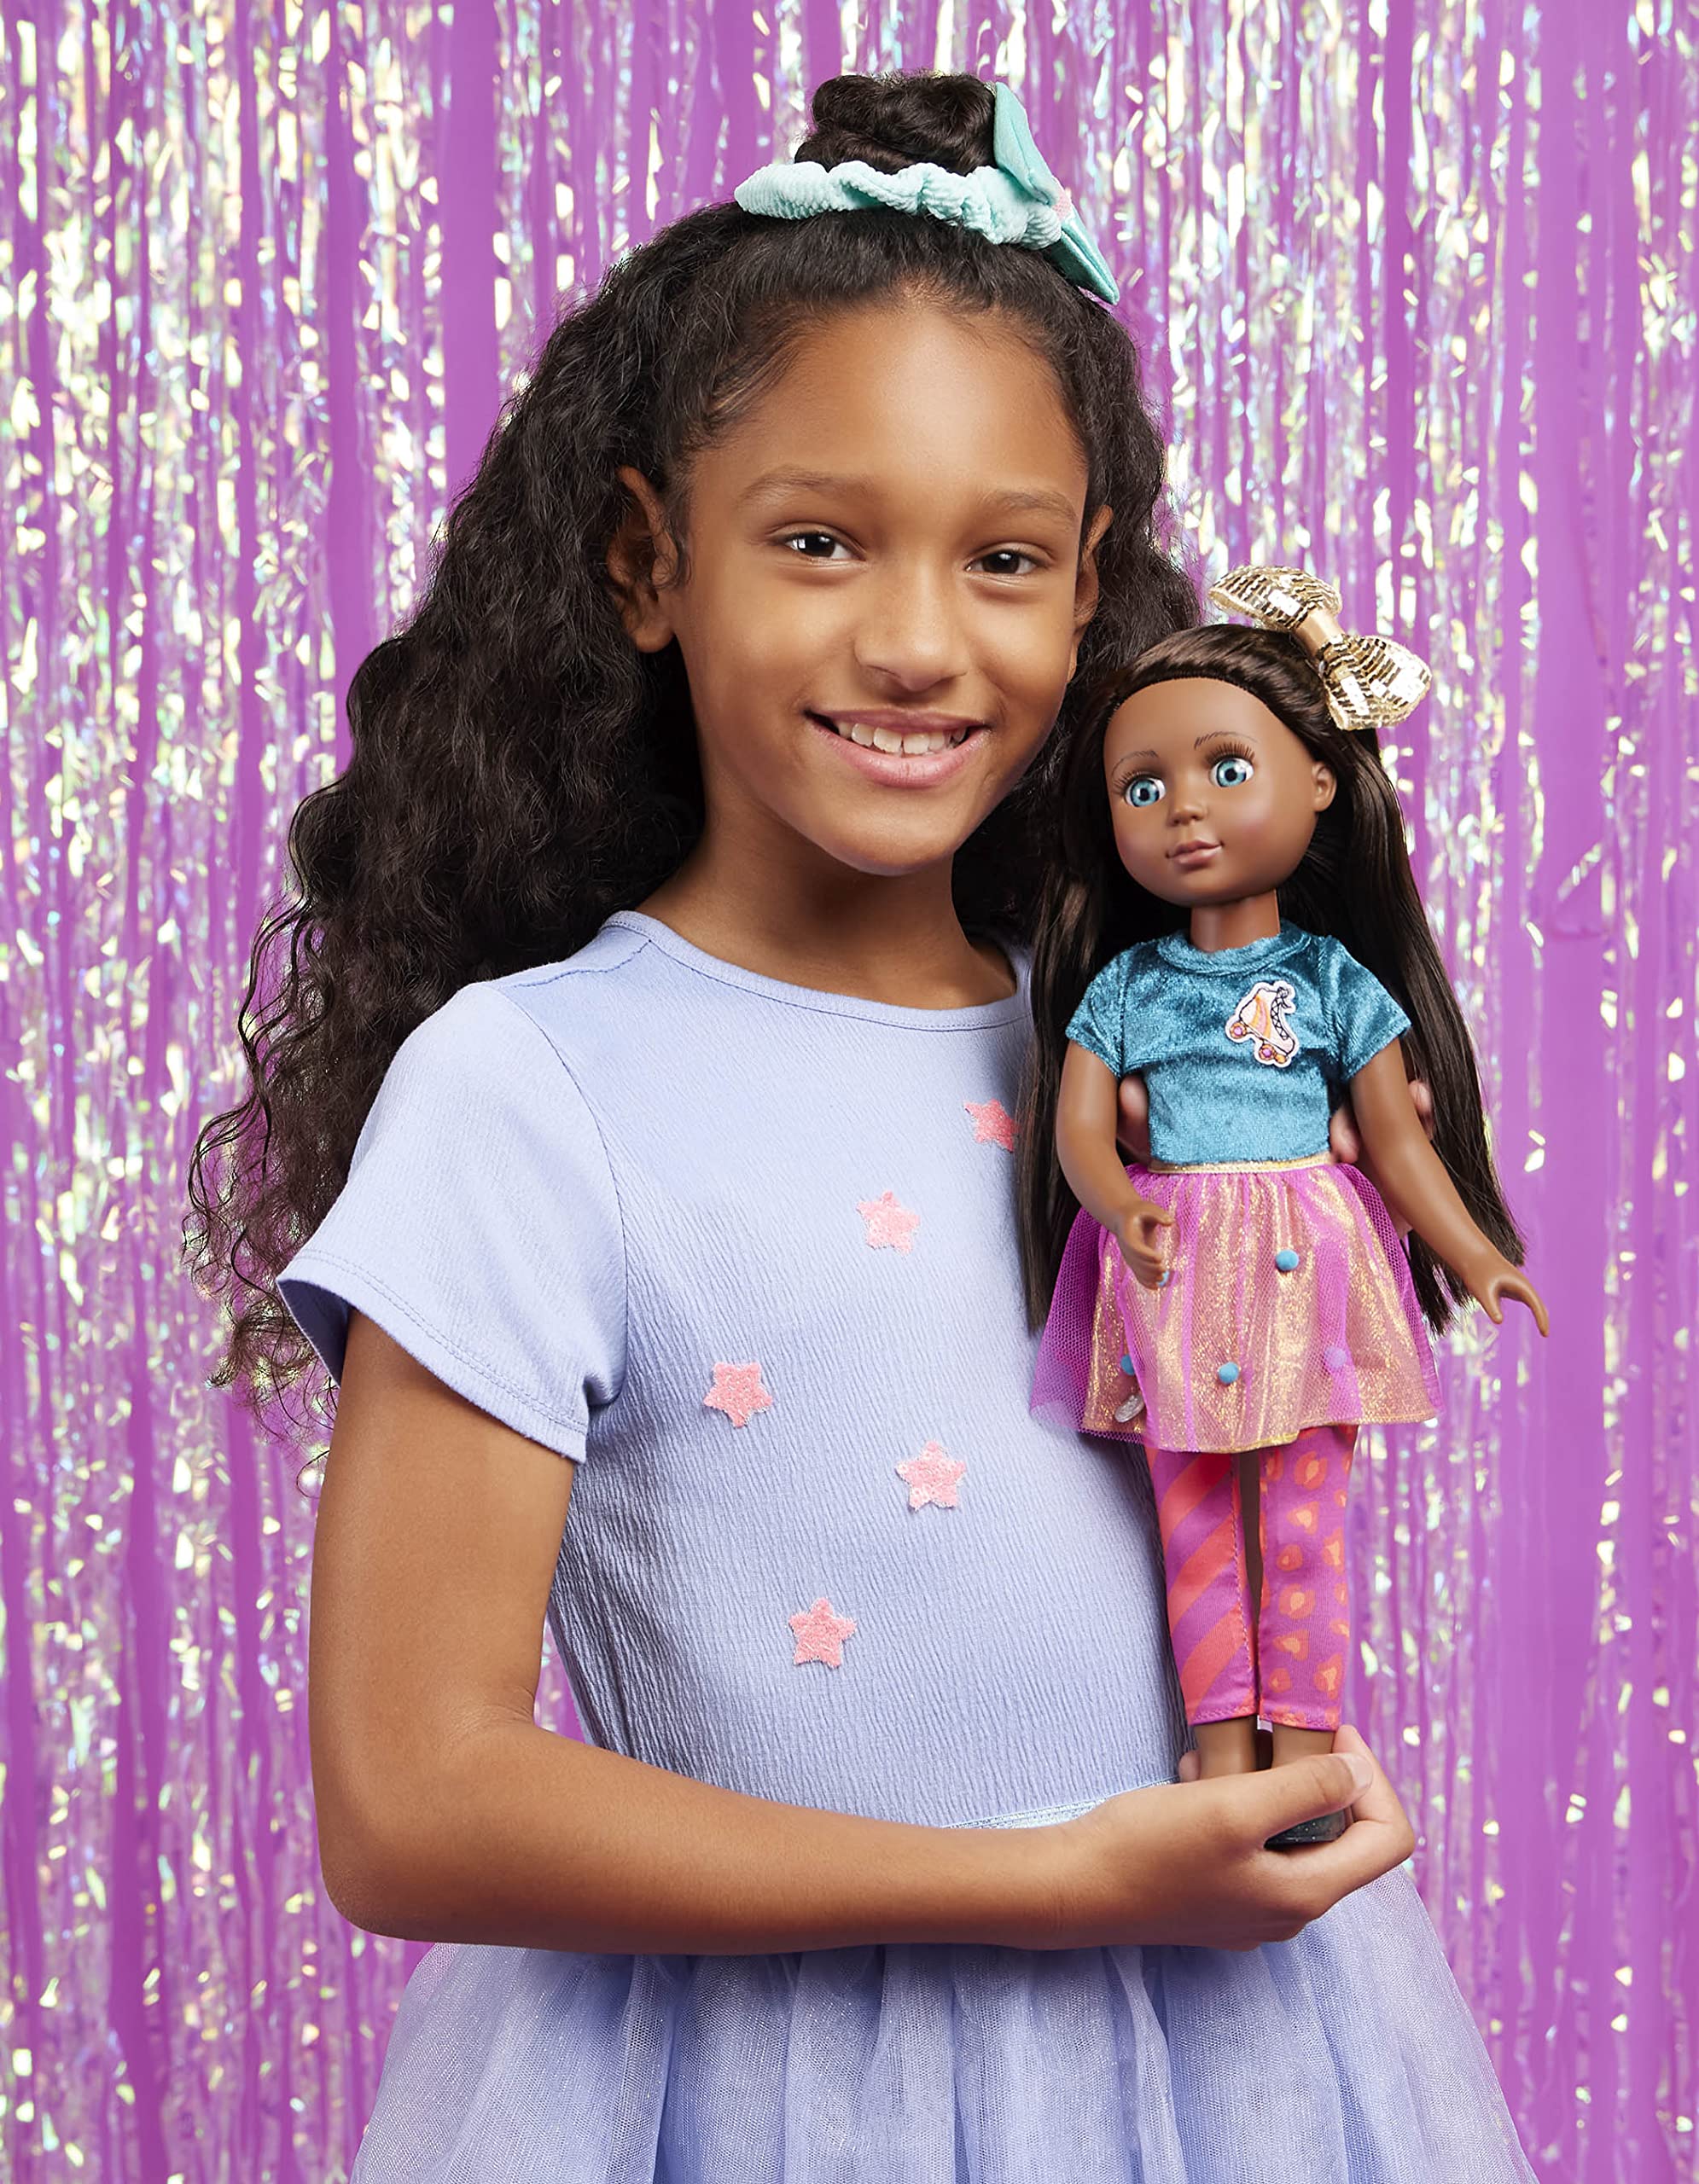 Glitter Girls - Odessa 14-inch Poseable Fashion Doll - Dolls for Girls Age 3 & Up